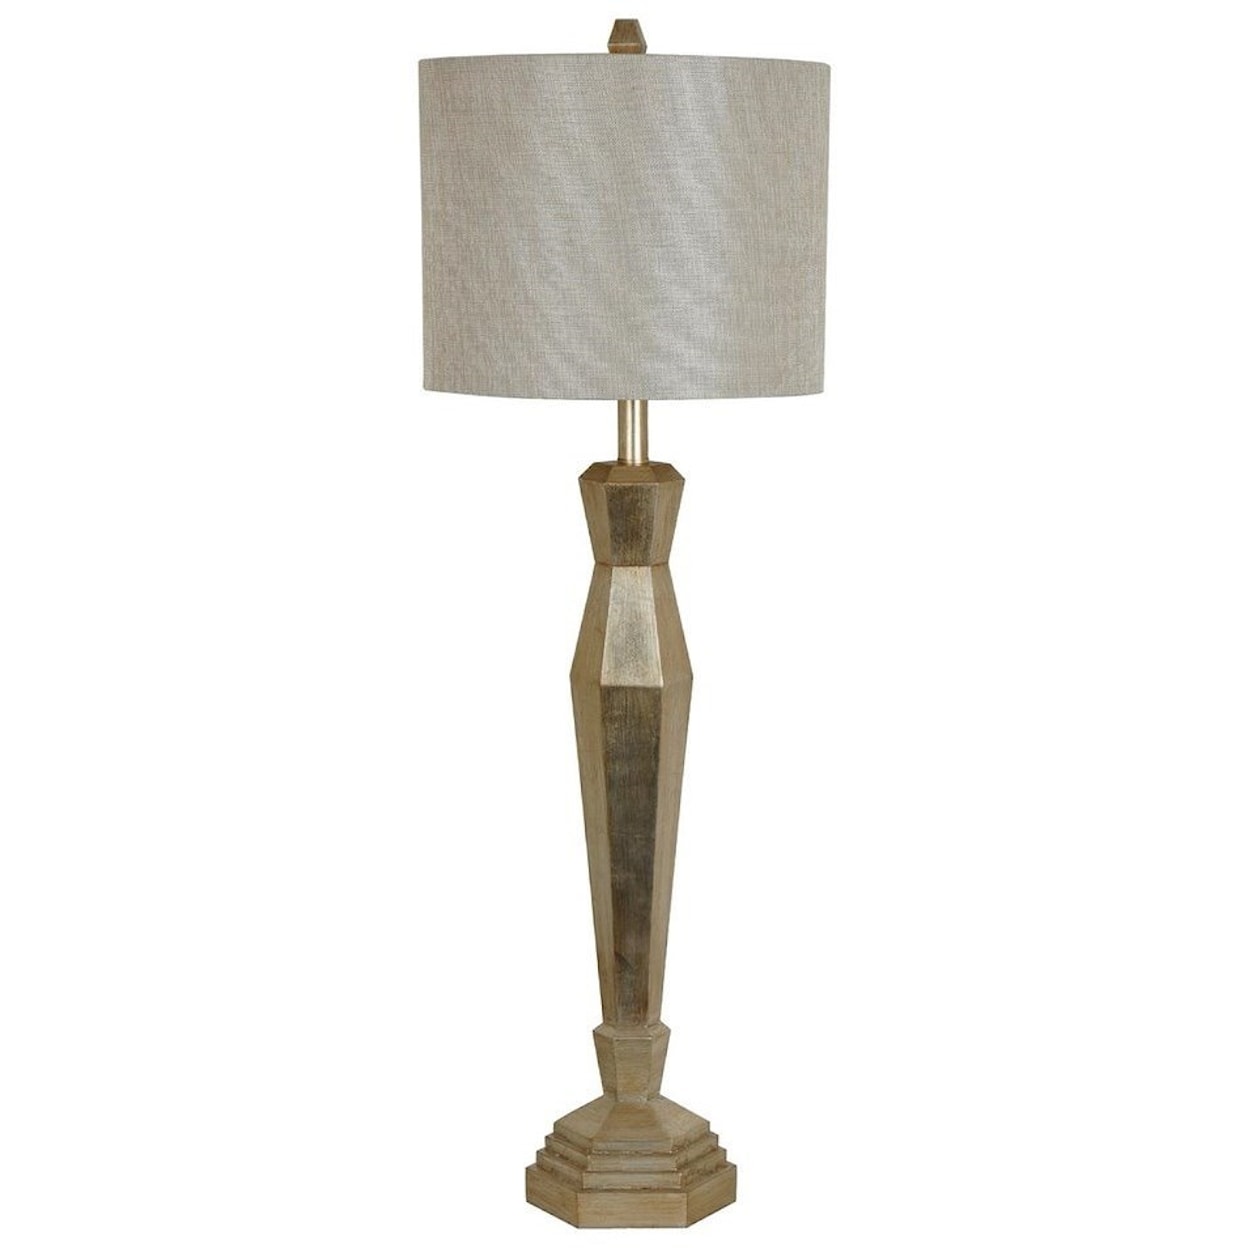 Crestview Collection Lighting Delano Table Lamp